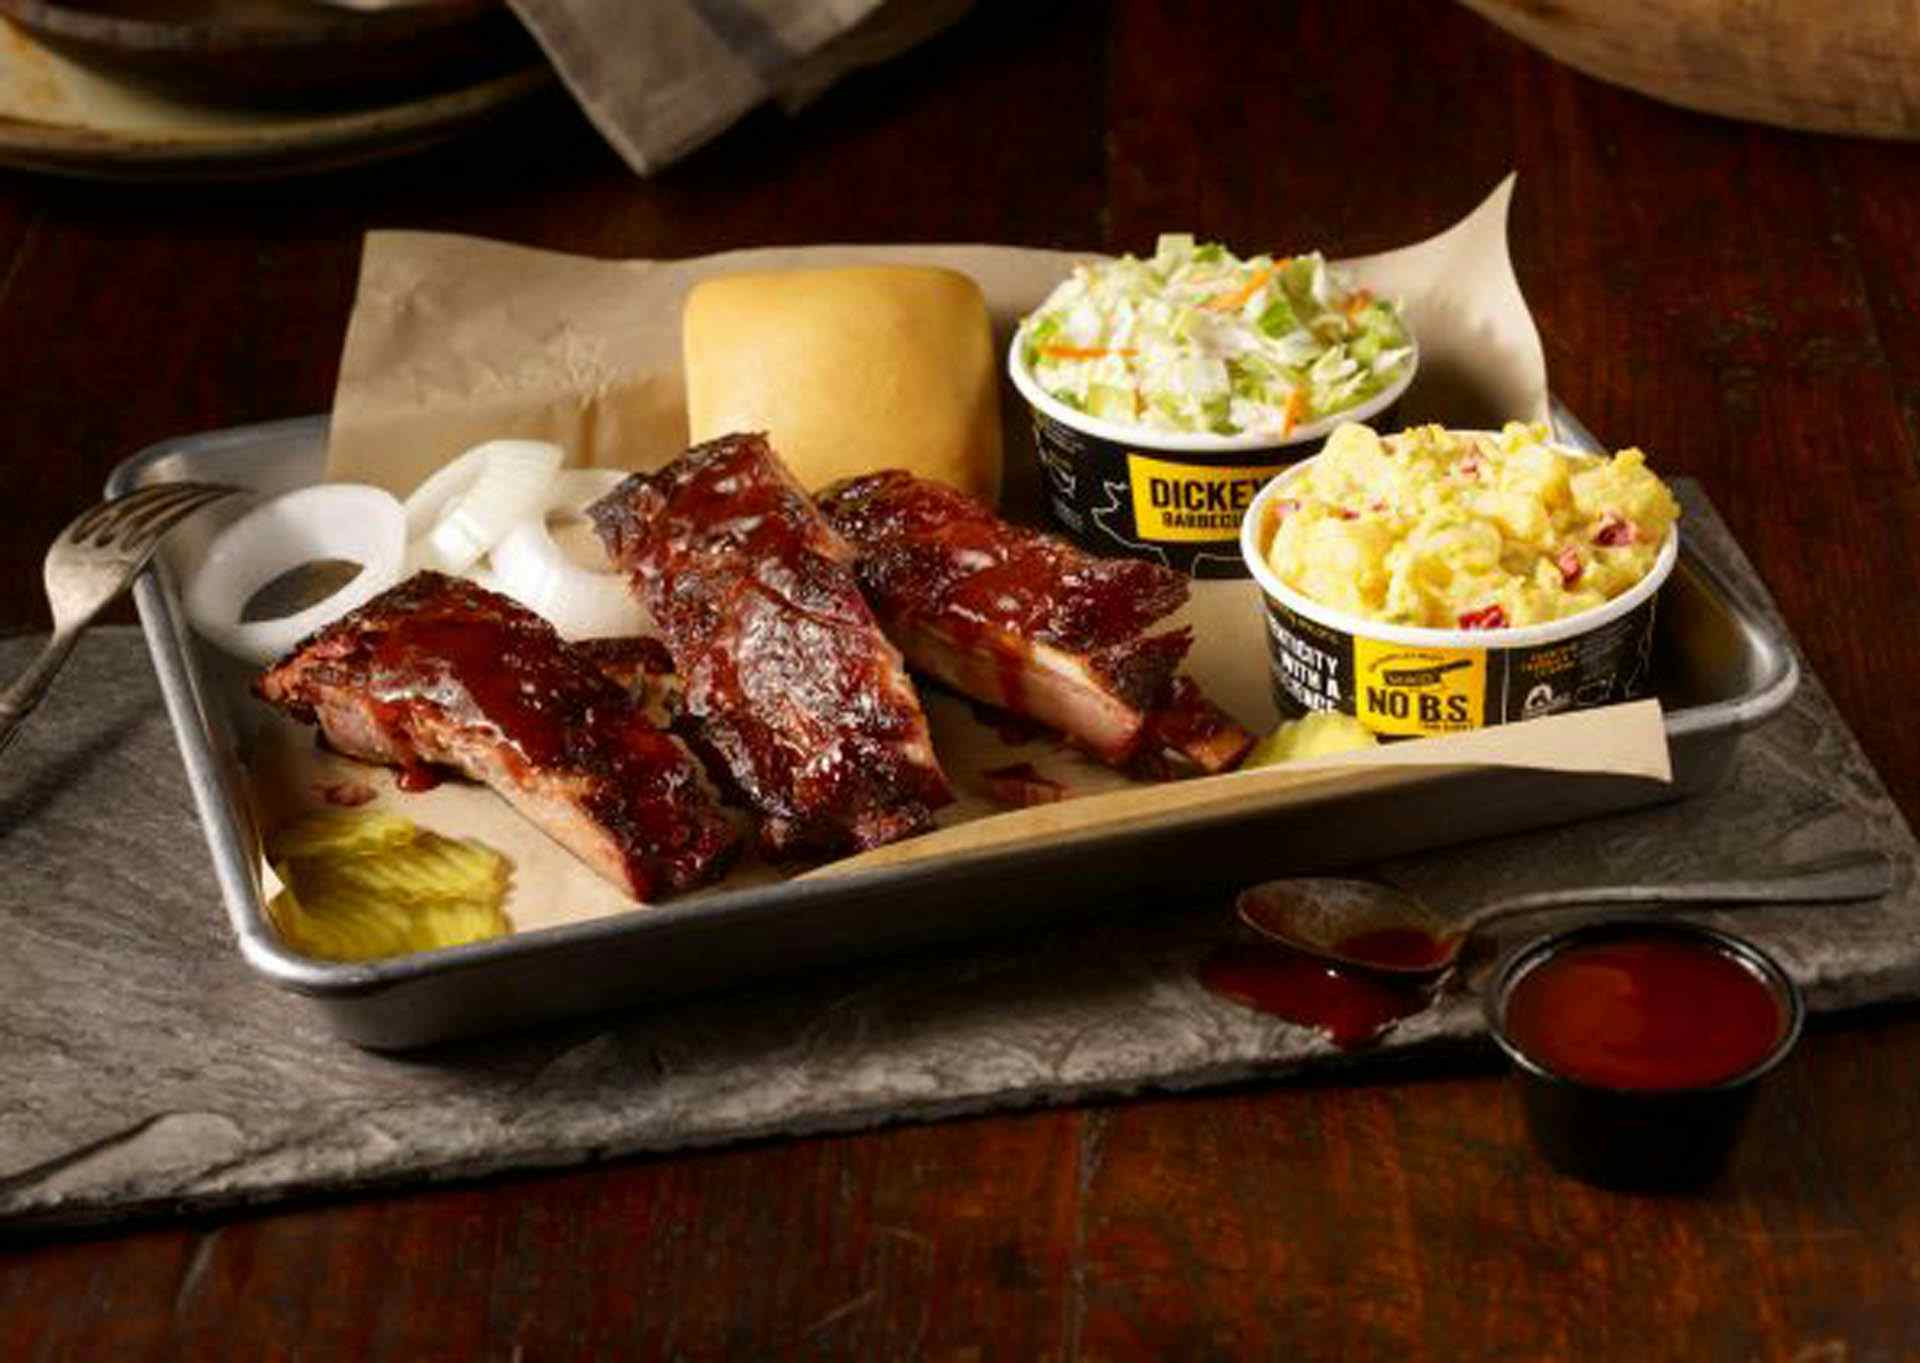 Franchising: Dickey’s Barbecue Pit Owner Brings New Location to Pearland, TX